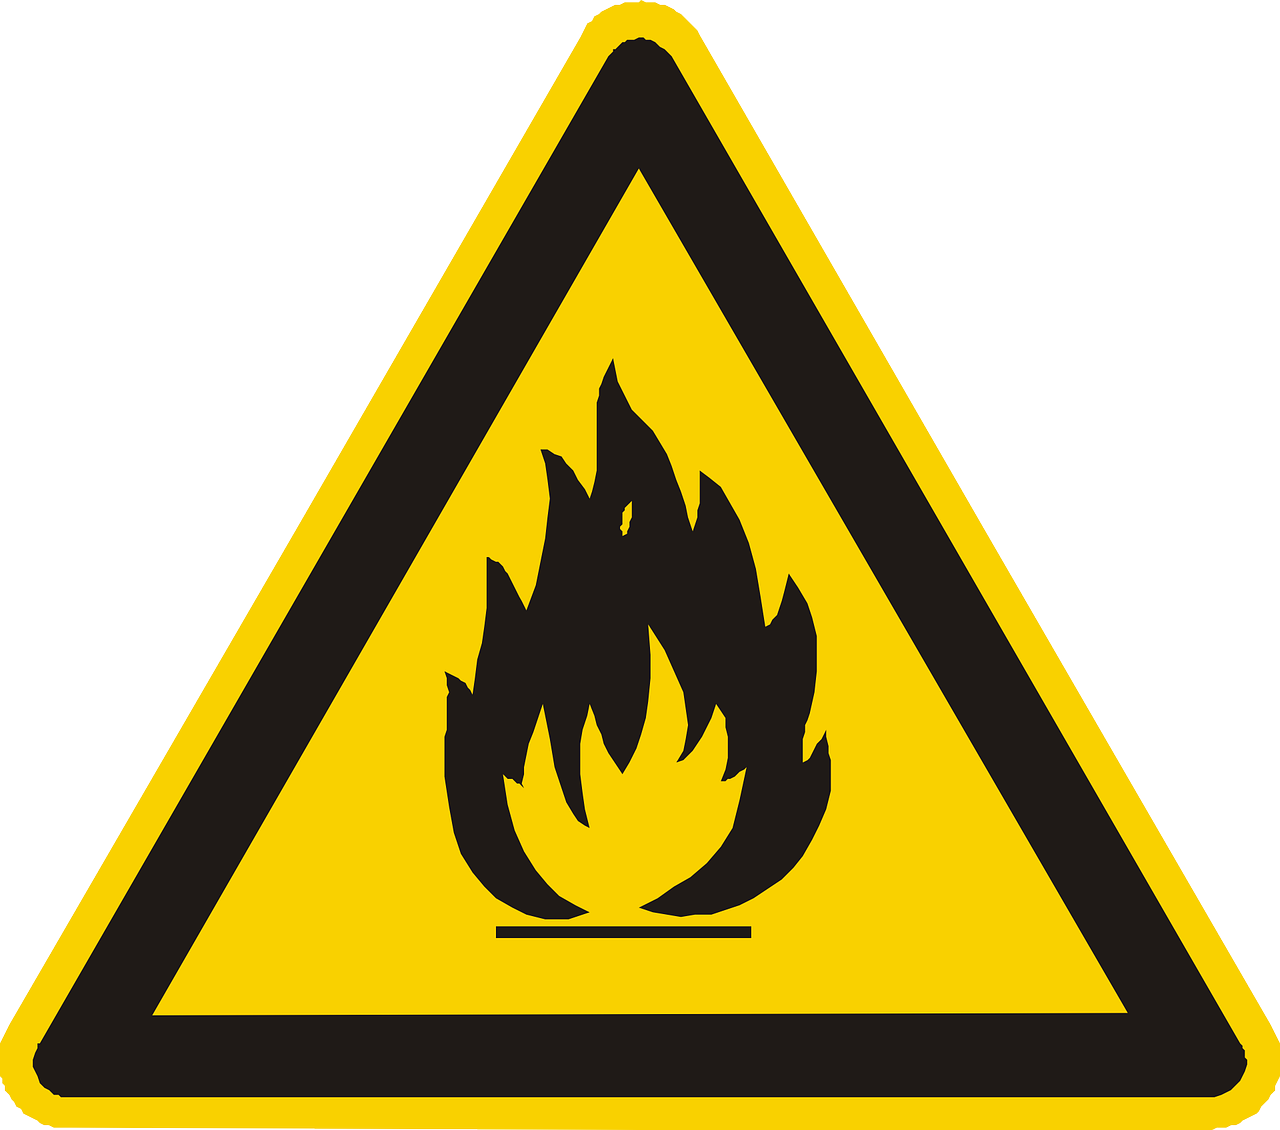 What Is An Example Of A Flammable And Combustible Material 